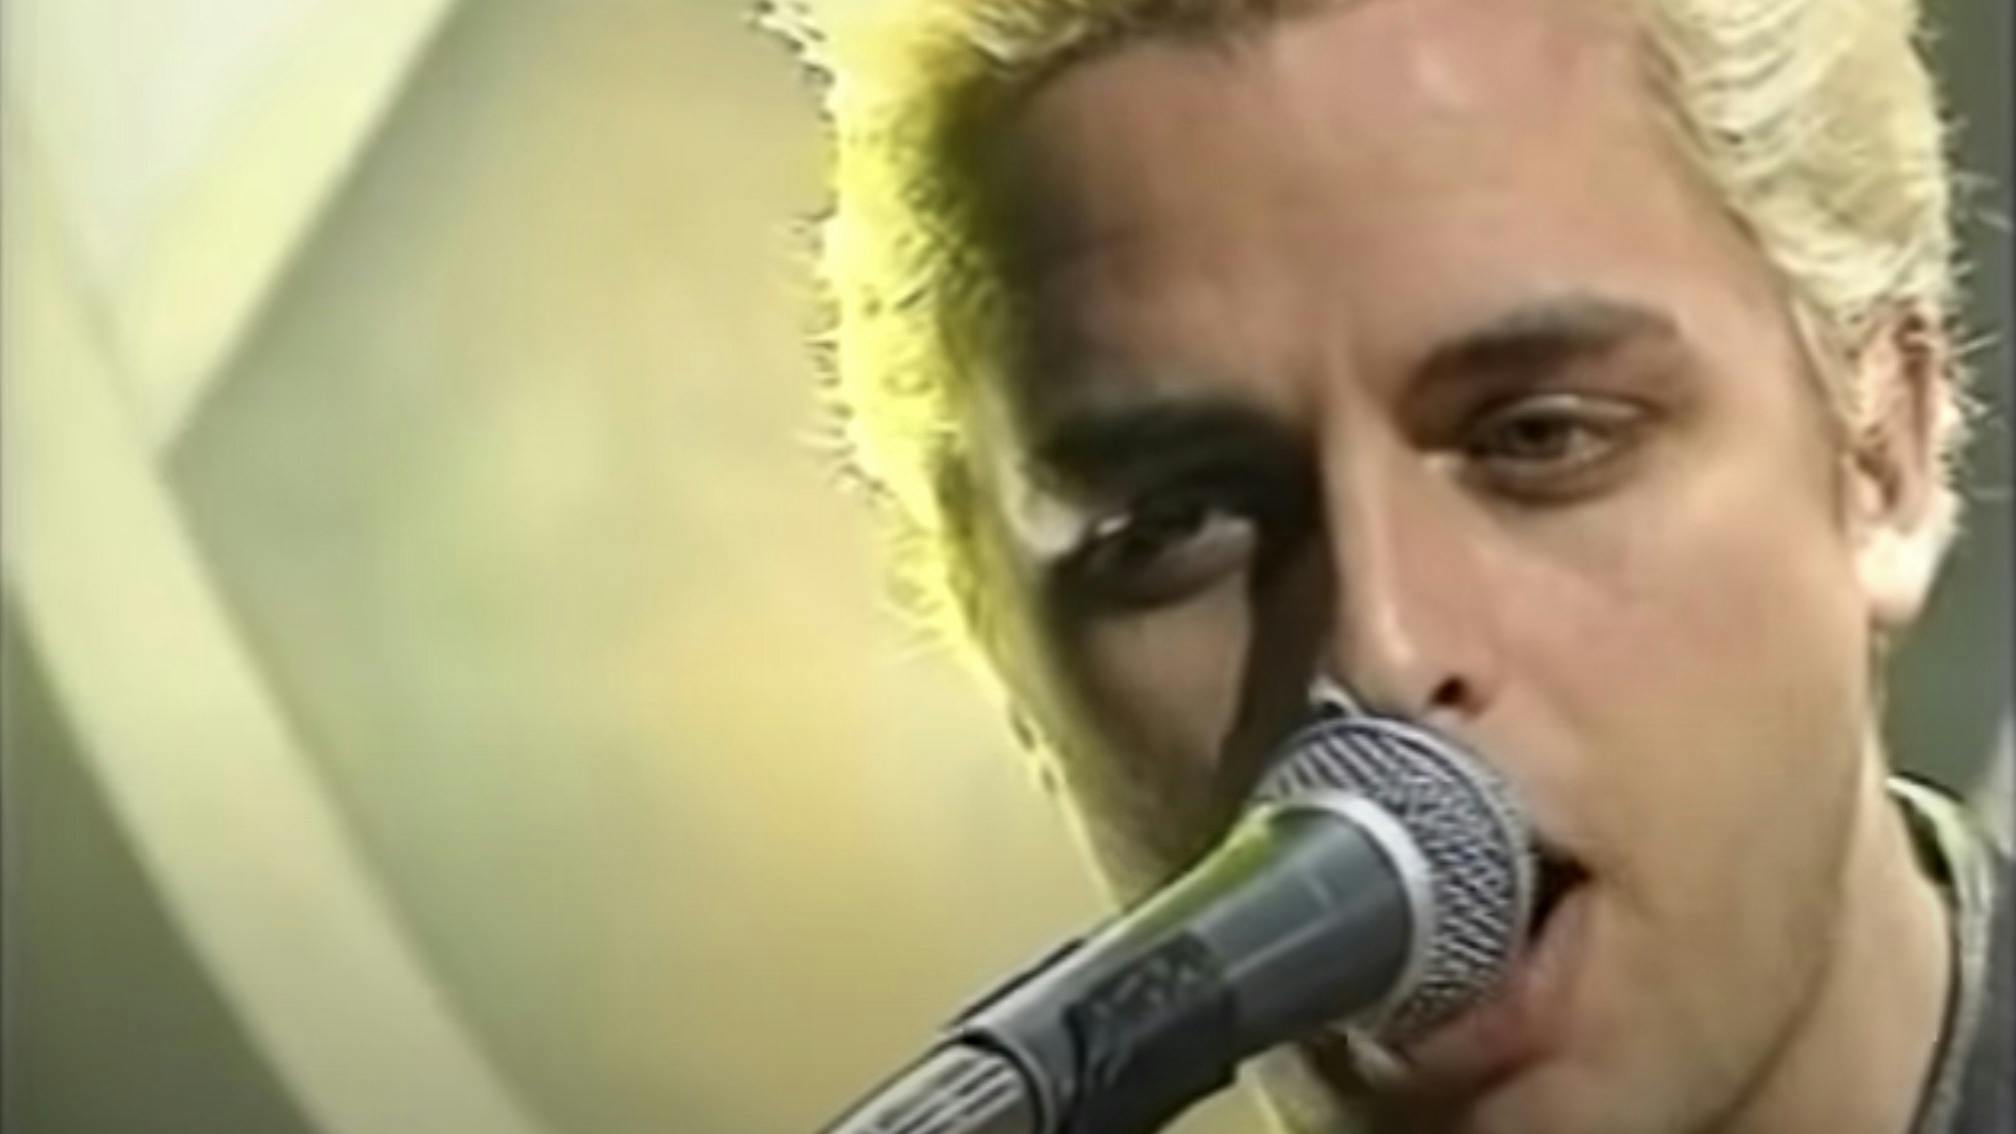 Watch Green Day Play Brain Stew And Jaded On TV In 1996